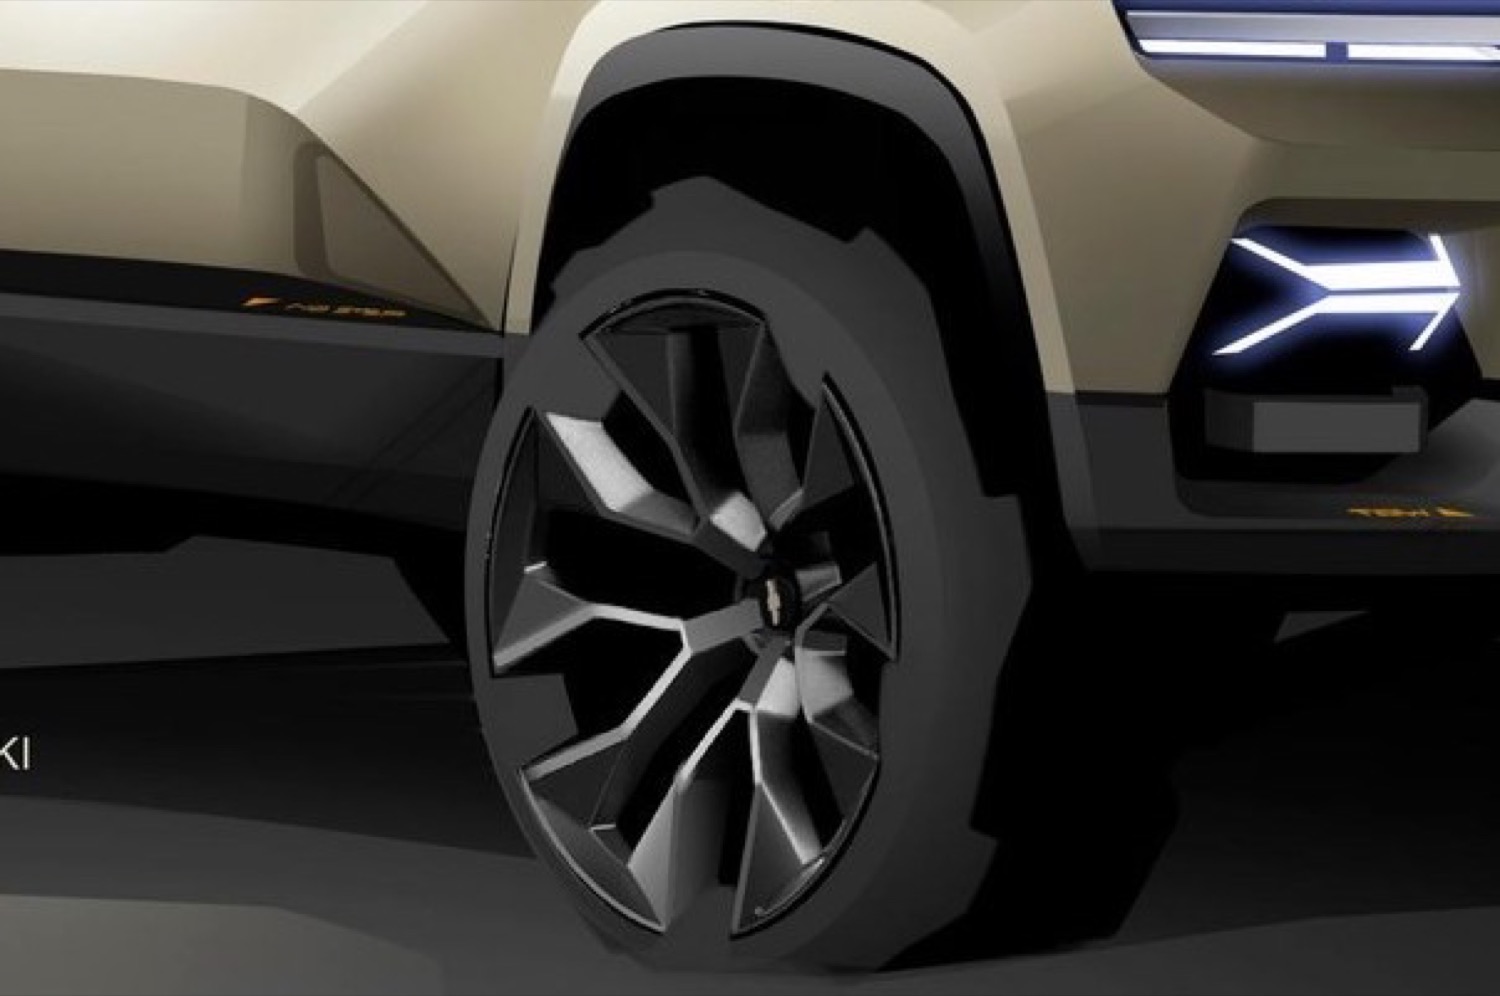 GM Design Team Releases Wide-Stance Chevy Utility Sketch